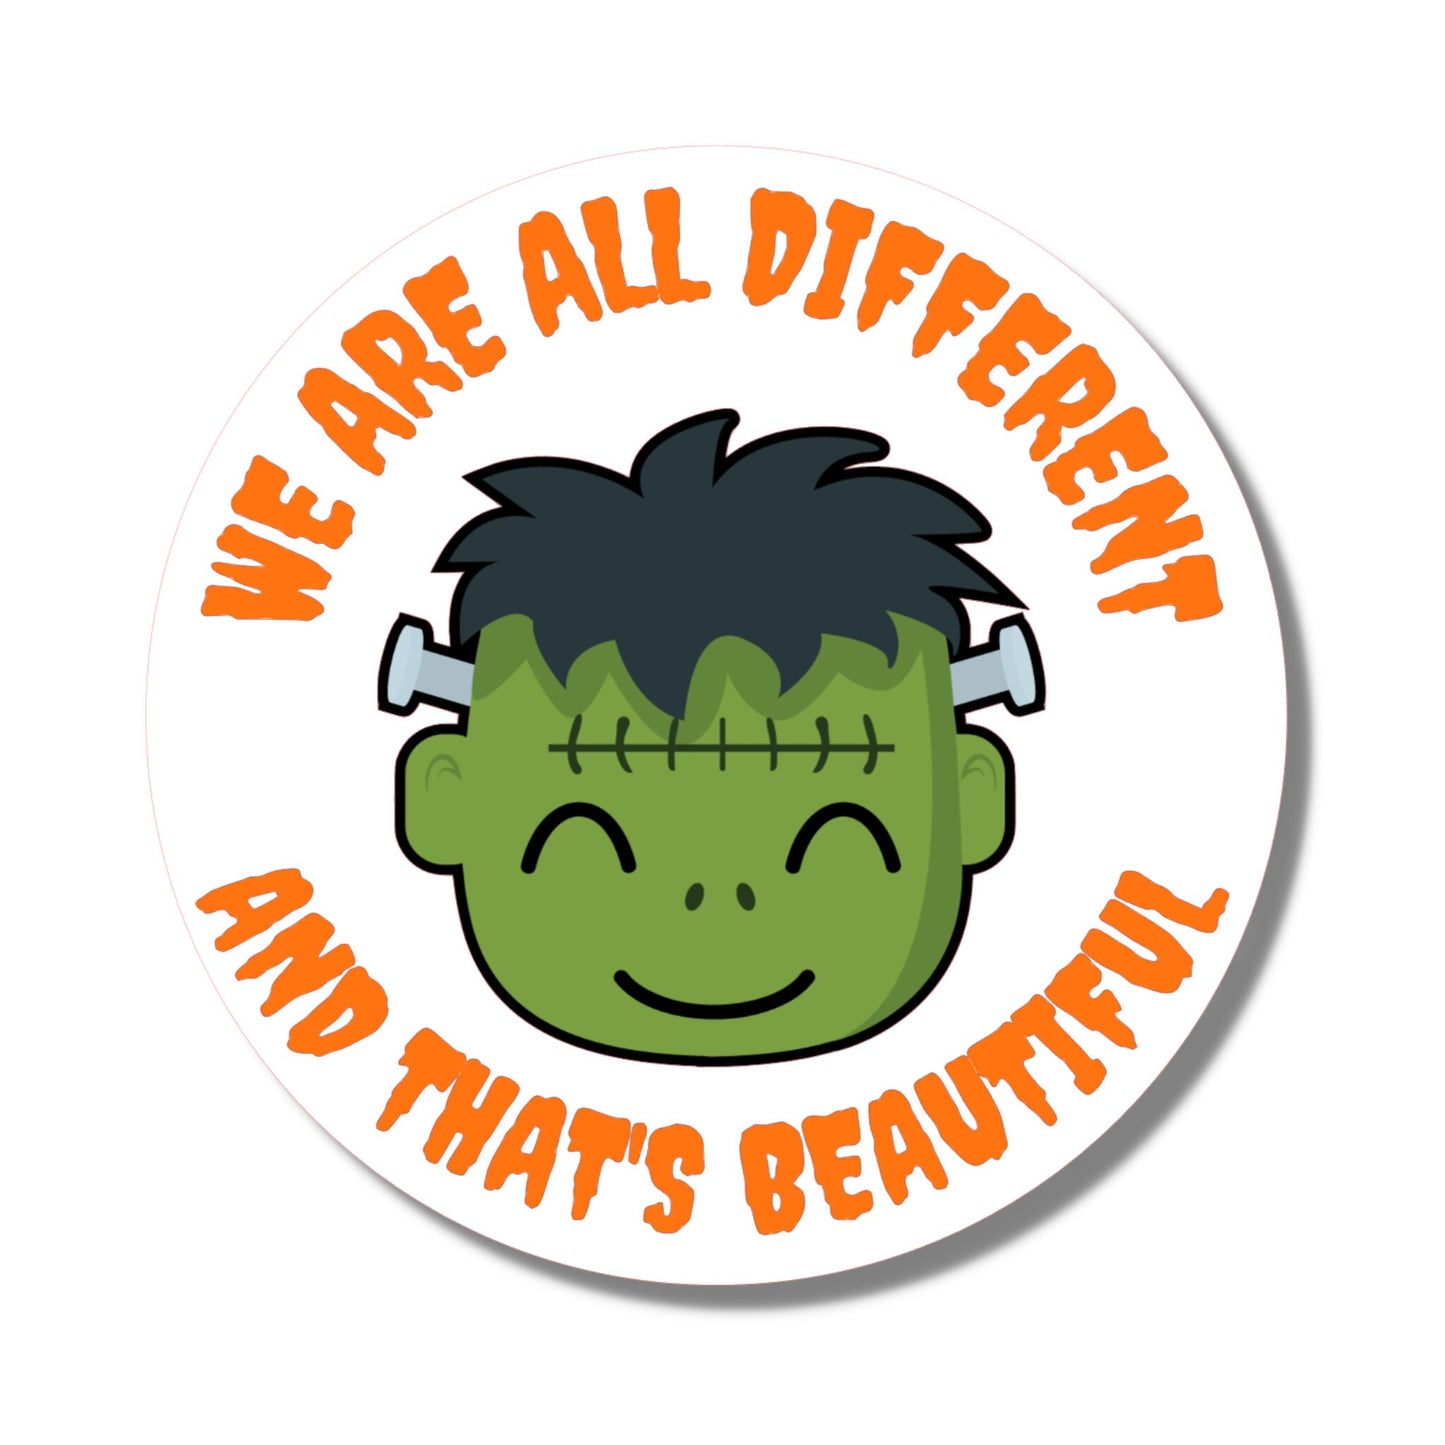 We're All Different and That's Beautiful Halloween Sticker, Waterproof Vinyl Sticker Decal